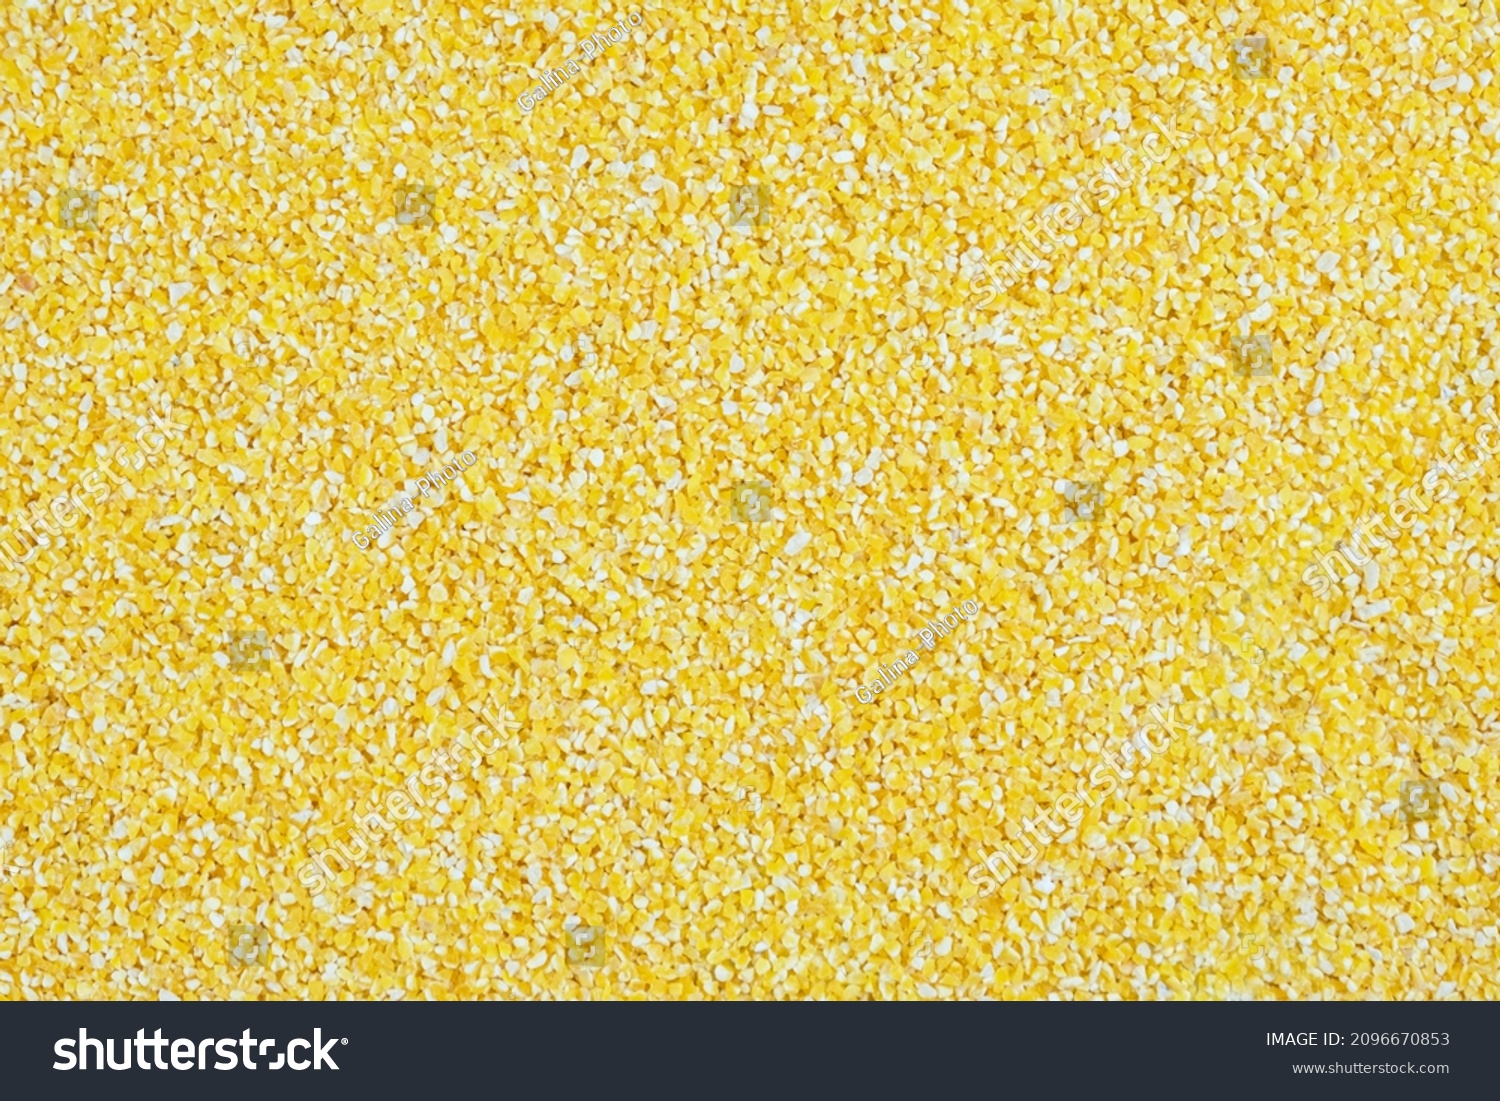 Abstract texture from corn grits. Corn products, gluten-free food. #2096670853